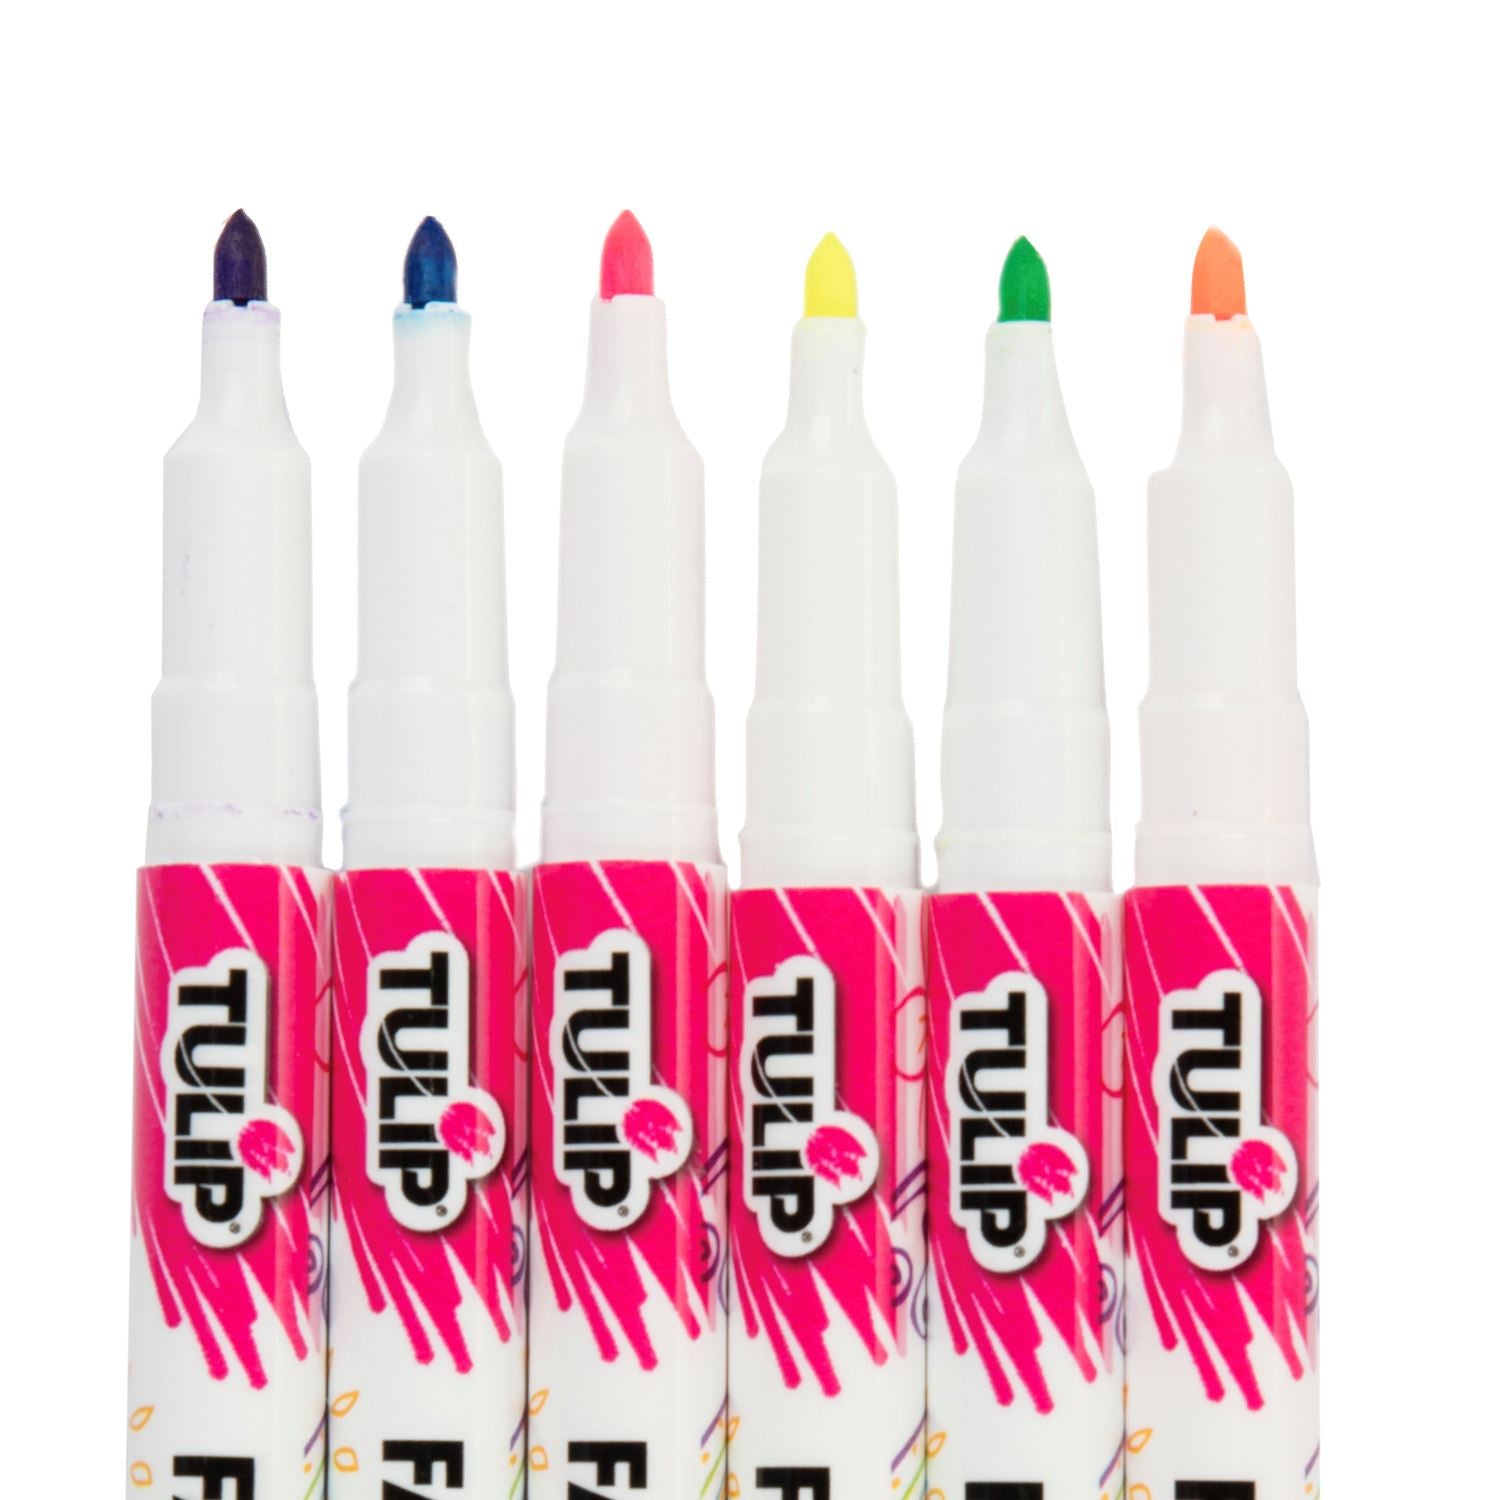 iLoveToCreate  fine tip primary rainbow fabric markers 6 pack